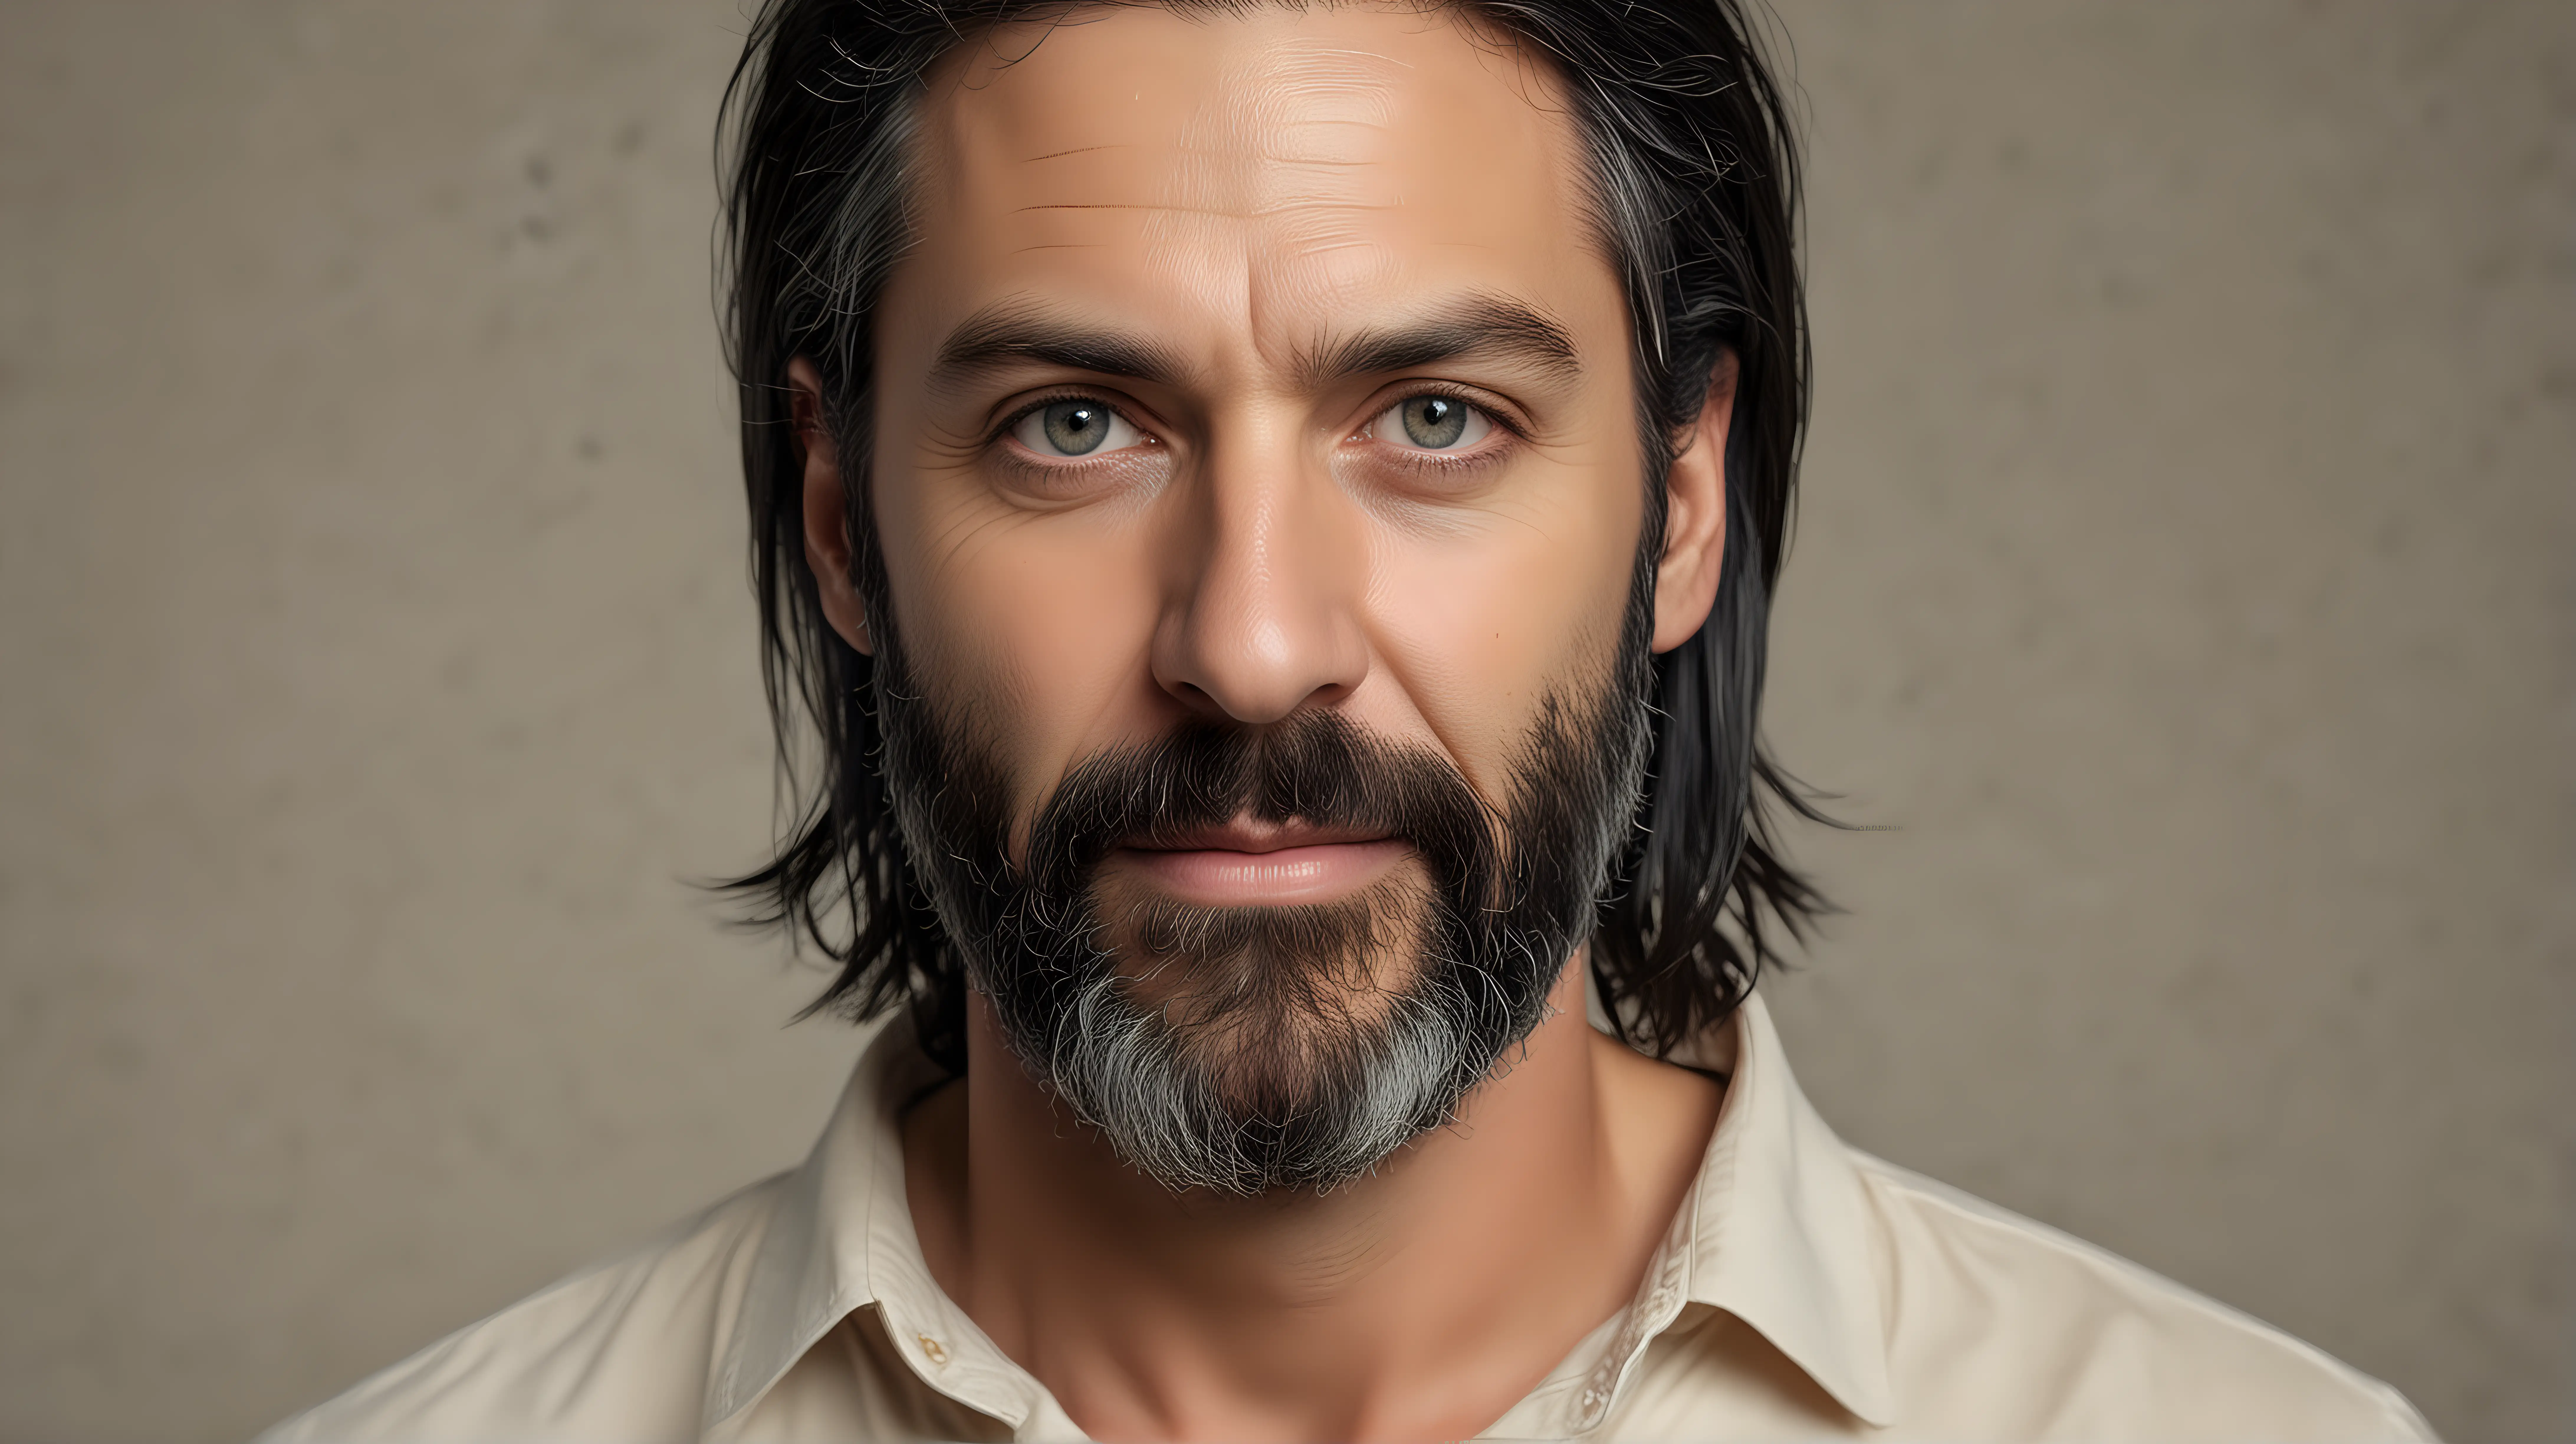 Portrait of a Mature Man with Long Grey Black Hair and Symmetrical Eyes in Cream Shirt 32k Resolution Photograph